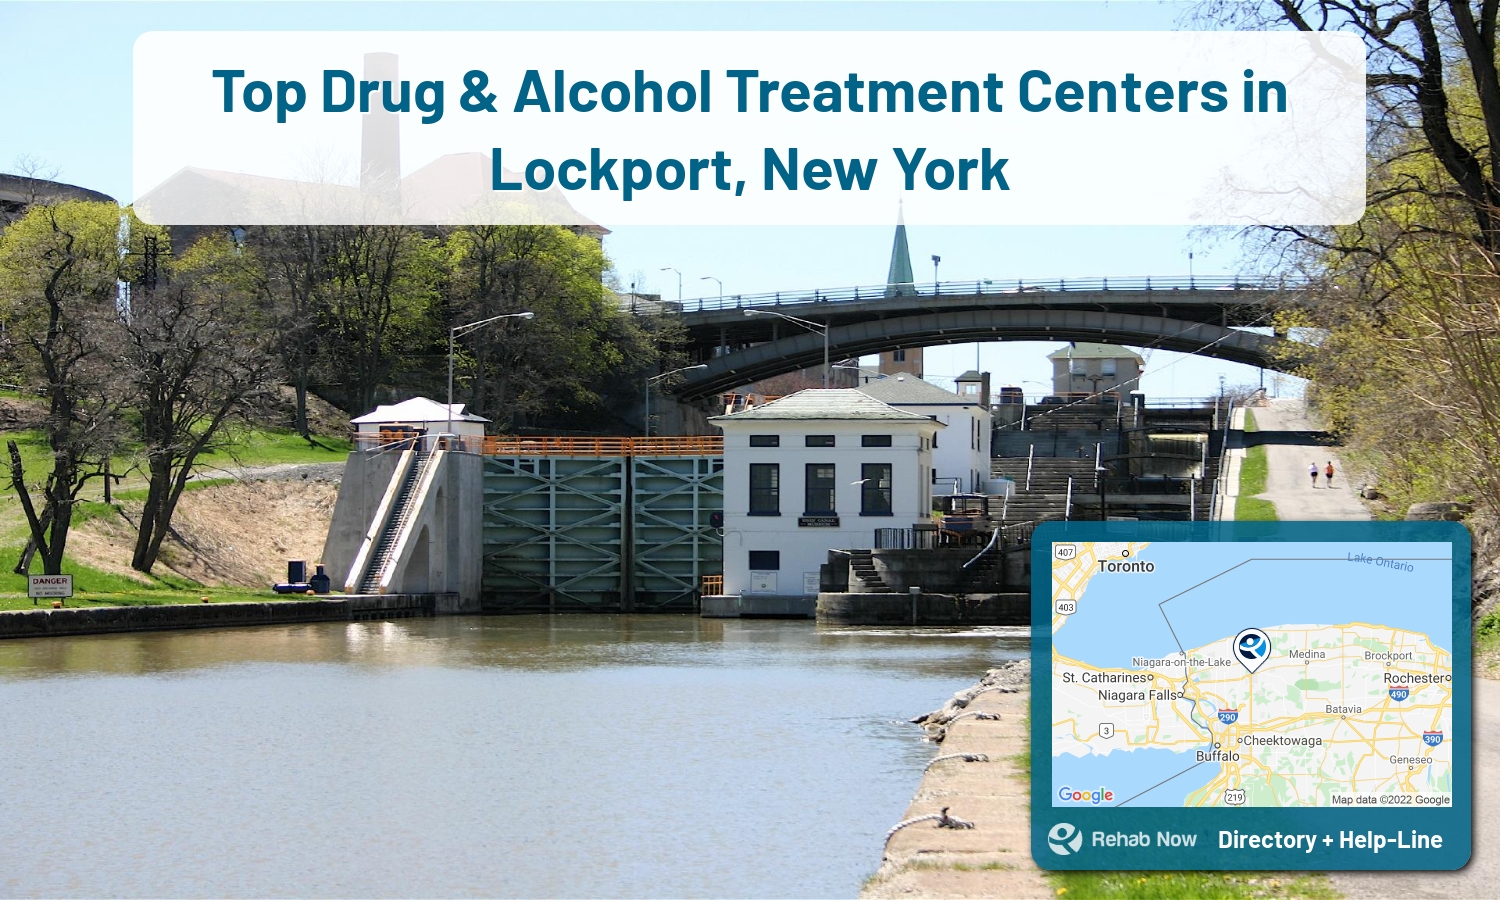 Ready to pick a rehab center in Lockport? Get off alcohol, opiates, and other drugs, by selecting top drug rehab centers in New York